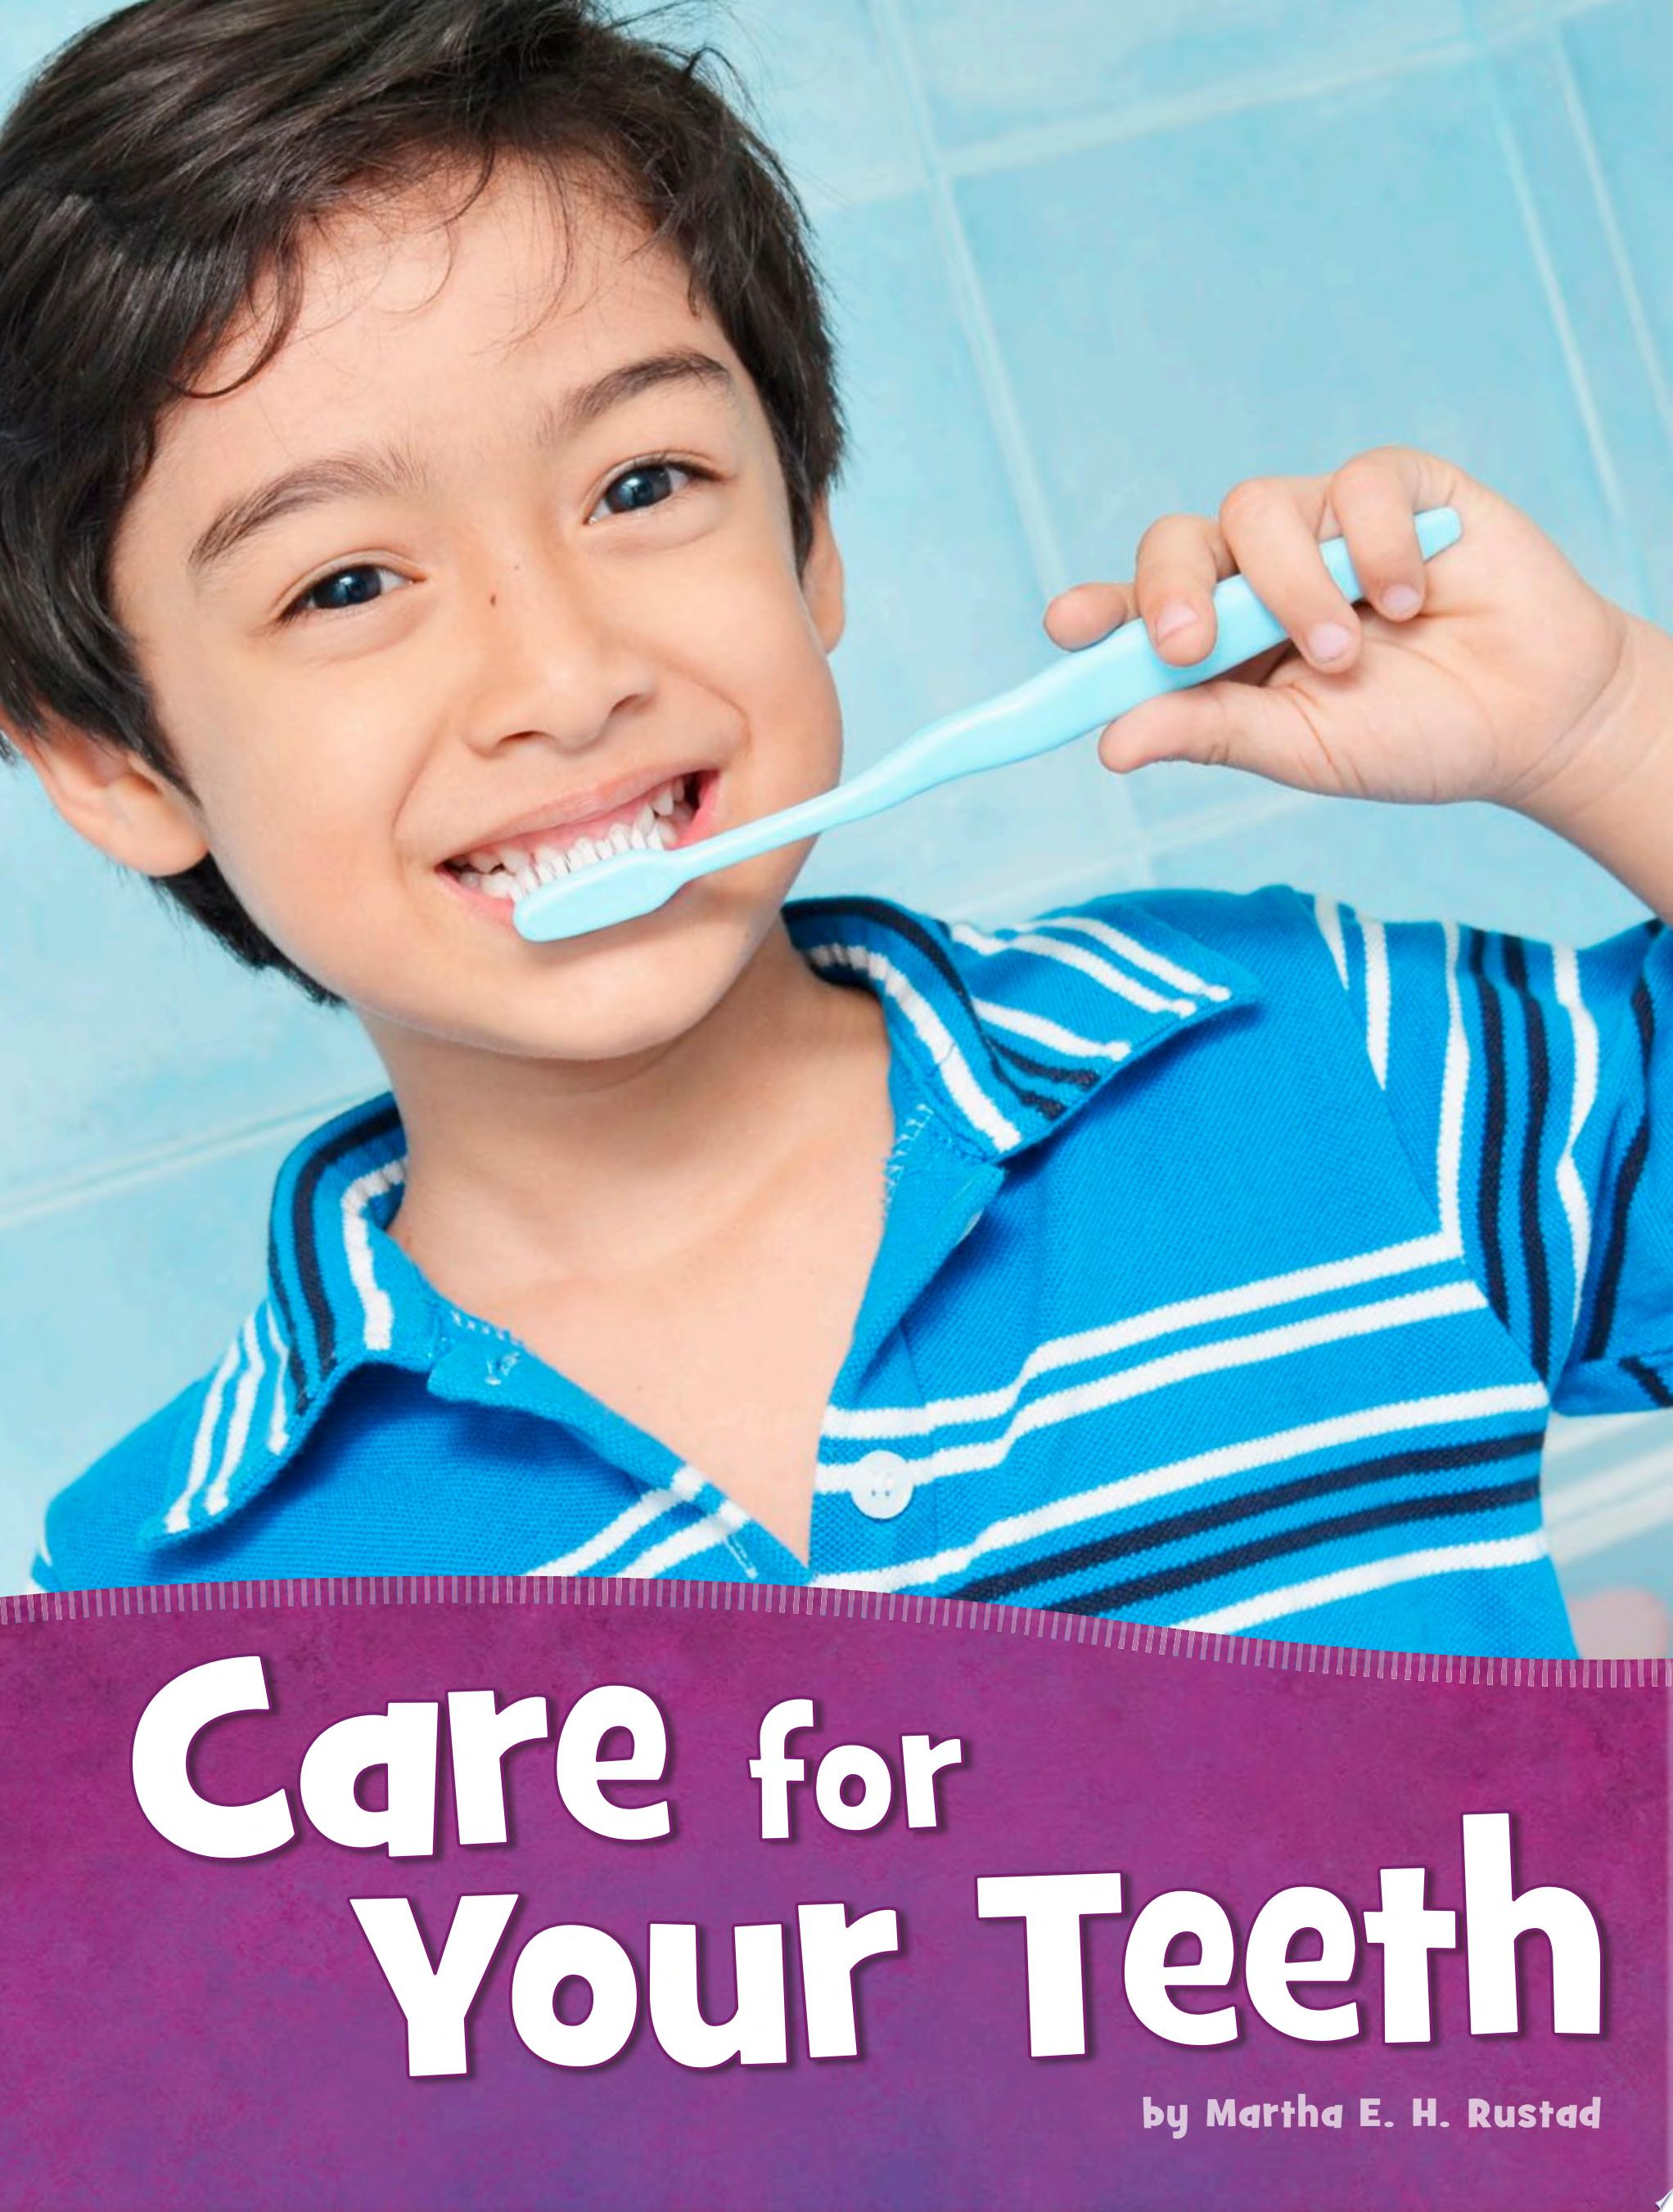 Image for "Care for Your Teeth"